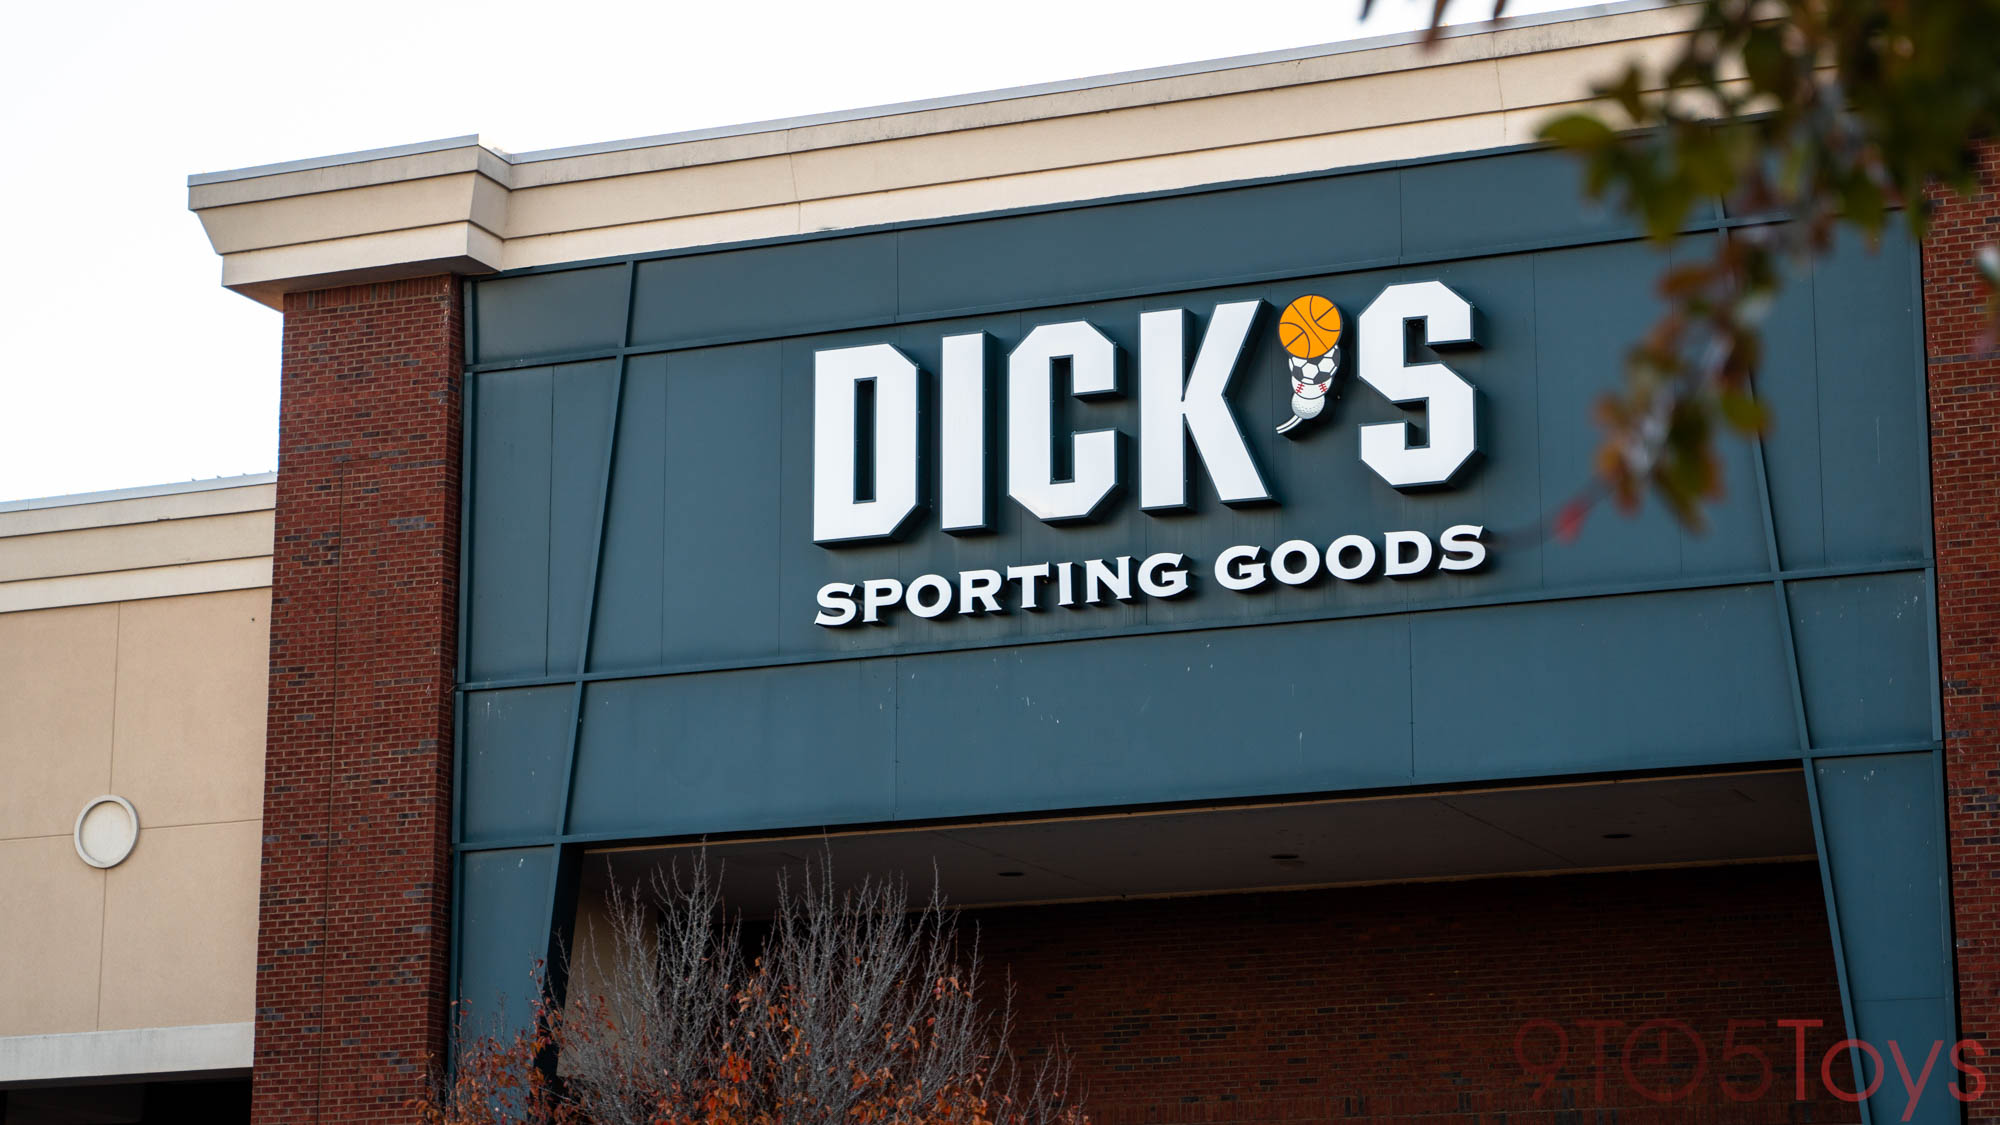 Dicks Sporting Goods Weekend Flash Sale Offers Up To 50 Off Nike Adidas More 